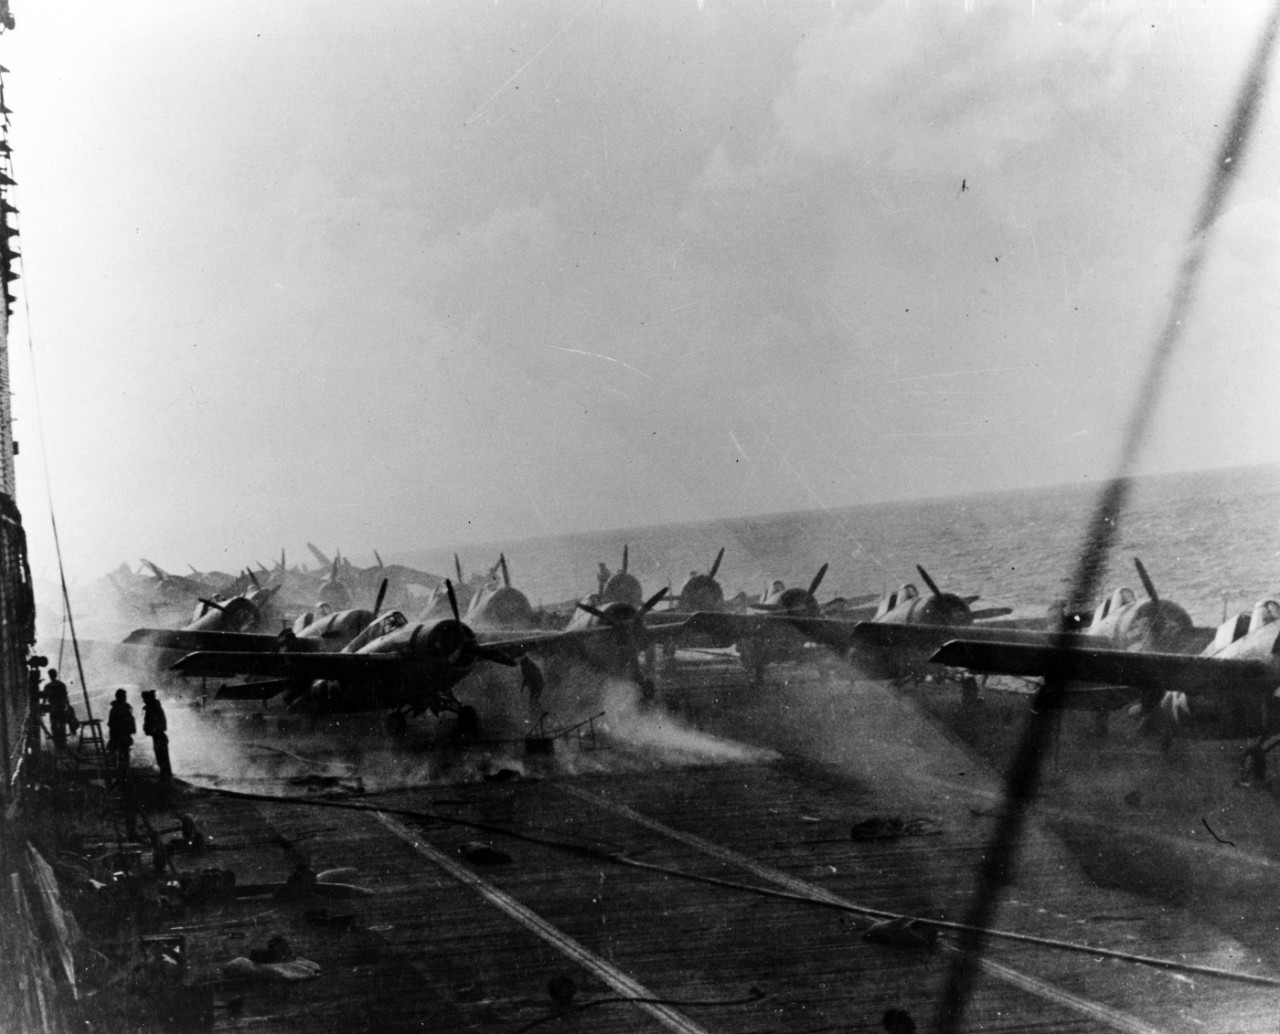 Photo #: 80-G-16802  Battle of the Coral Sea, May 1942